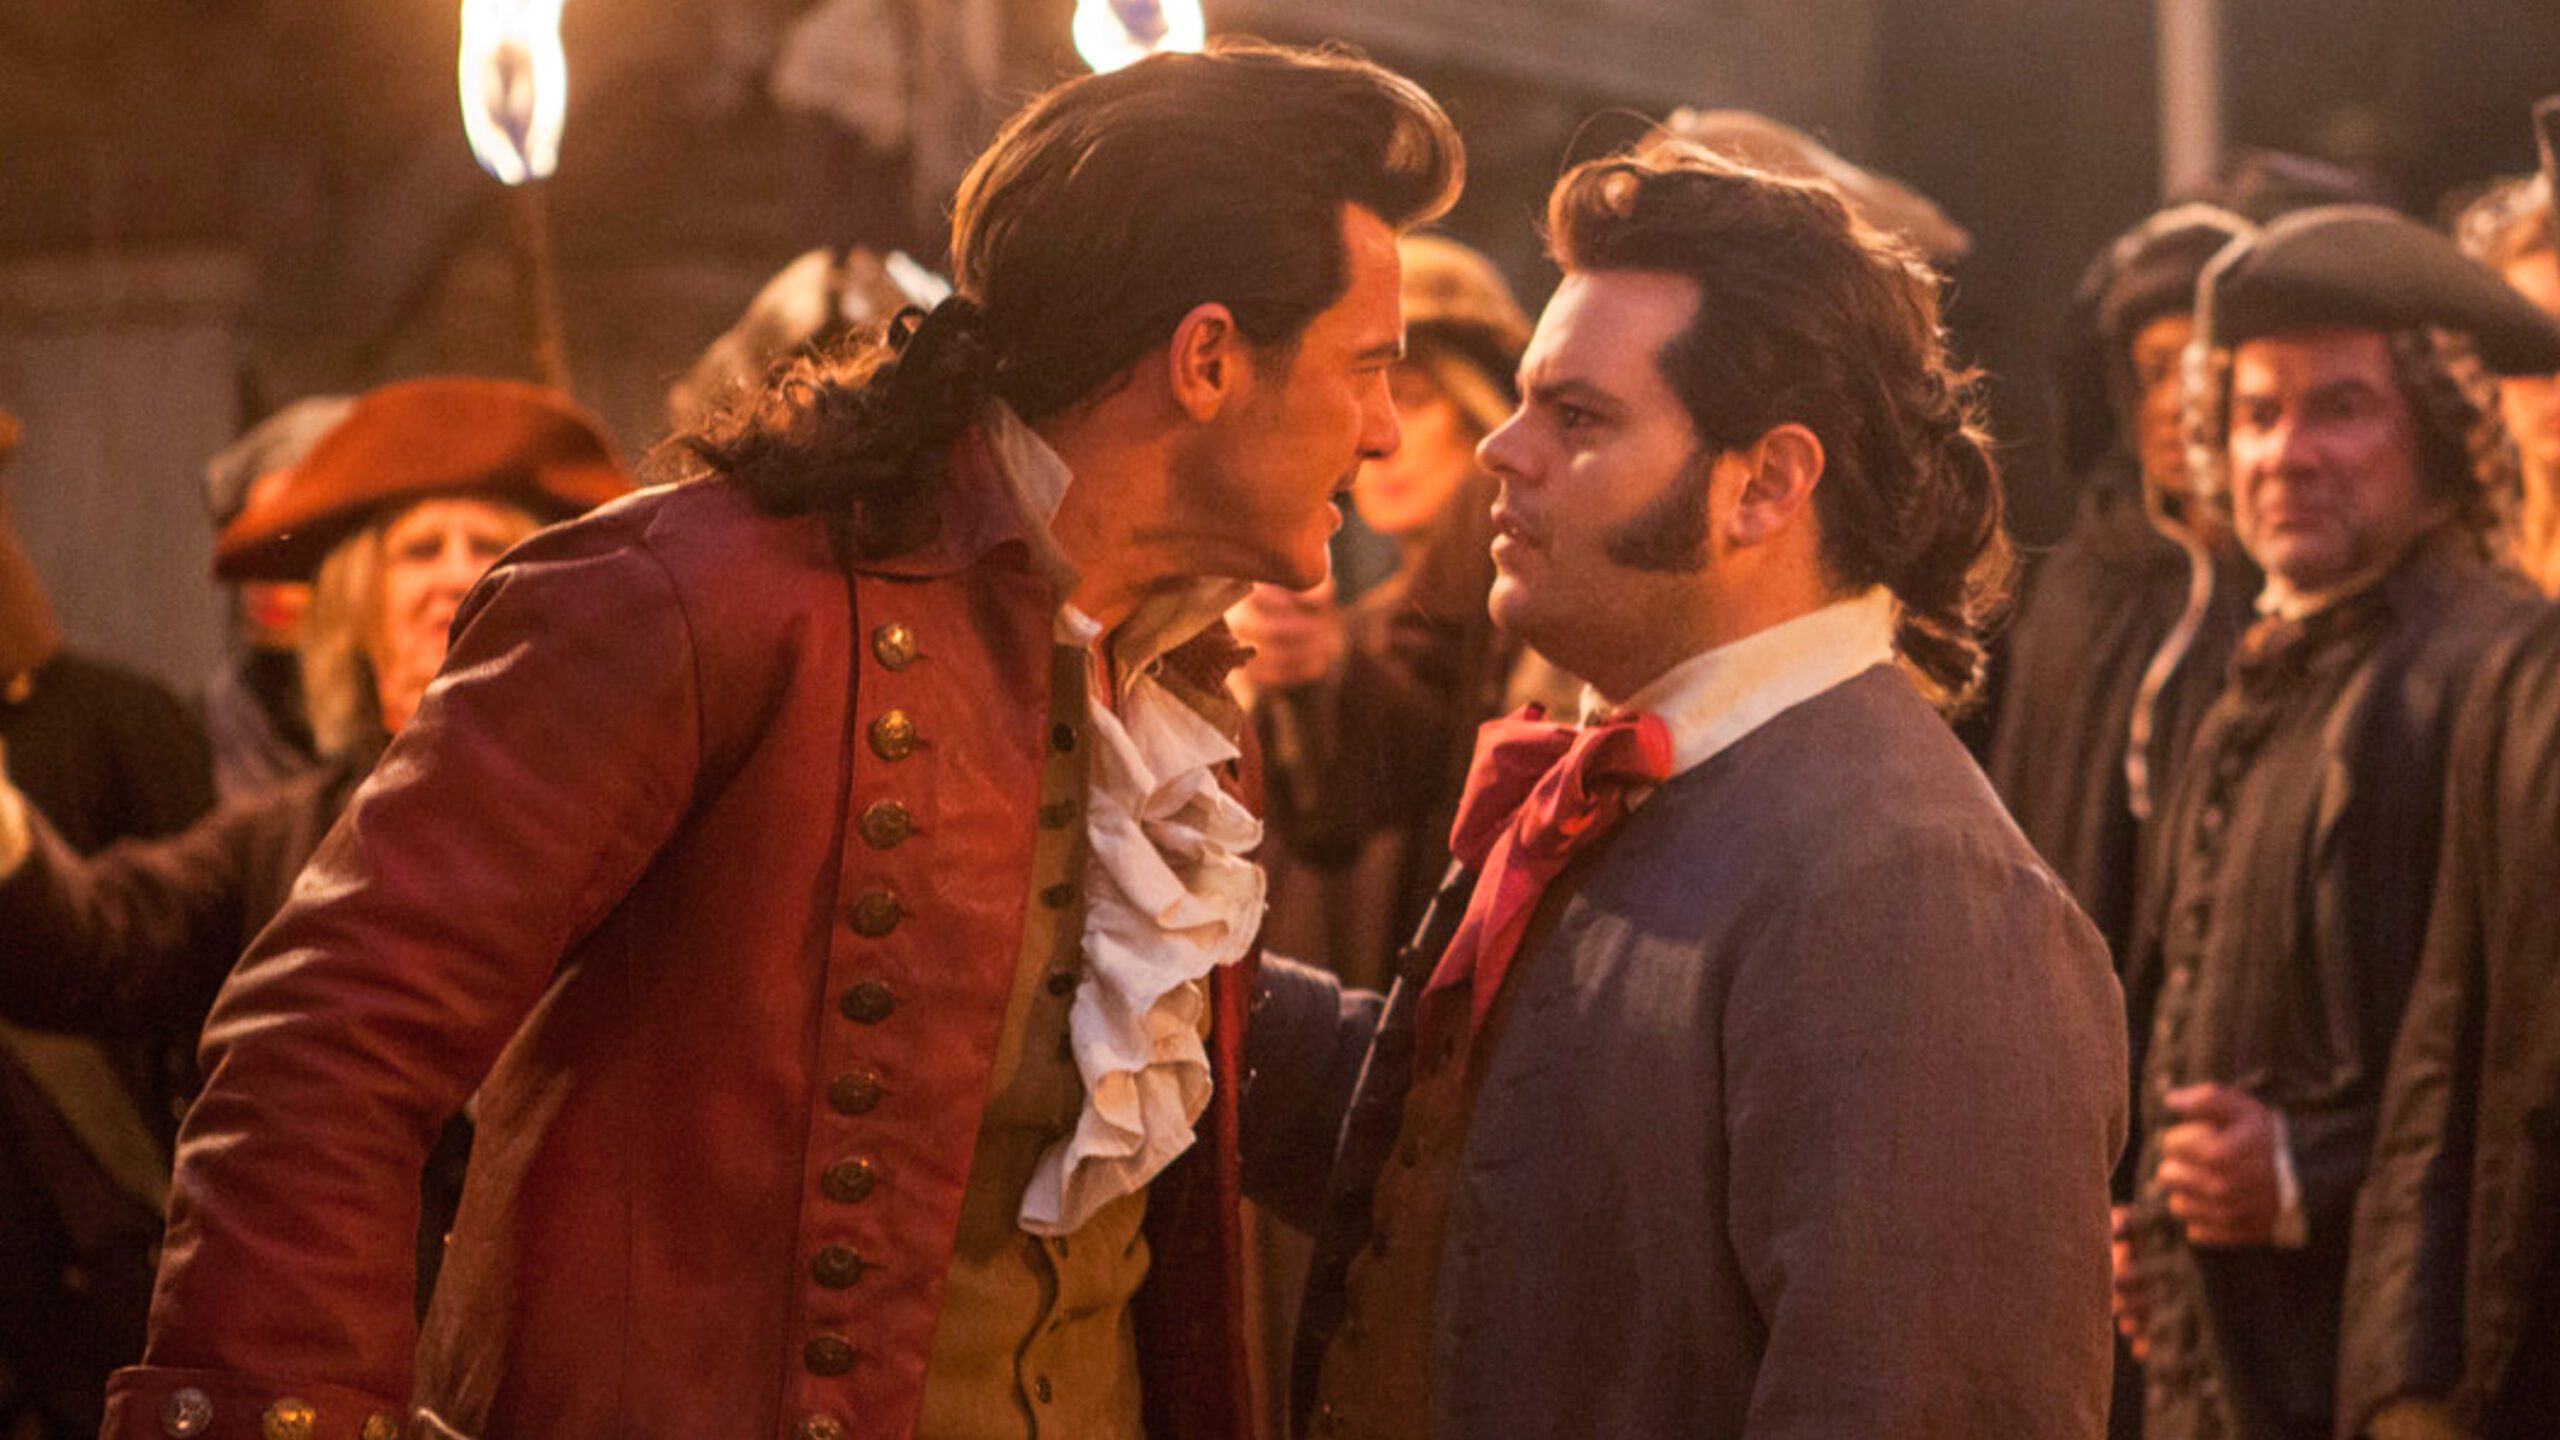 Disney’s first ‘exclusively gay moment’ to be shown in ‘Beauty and the Beast’